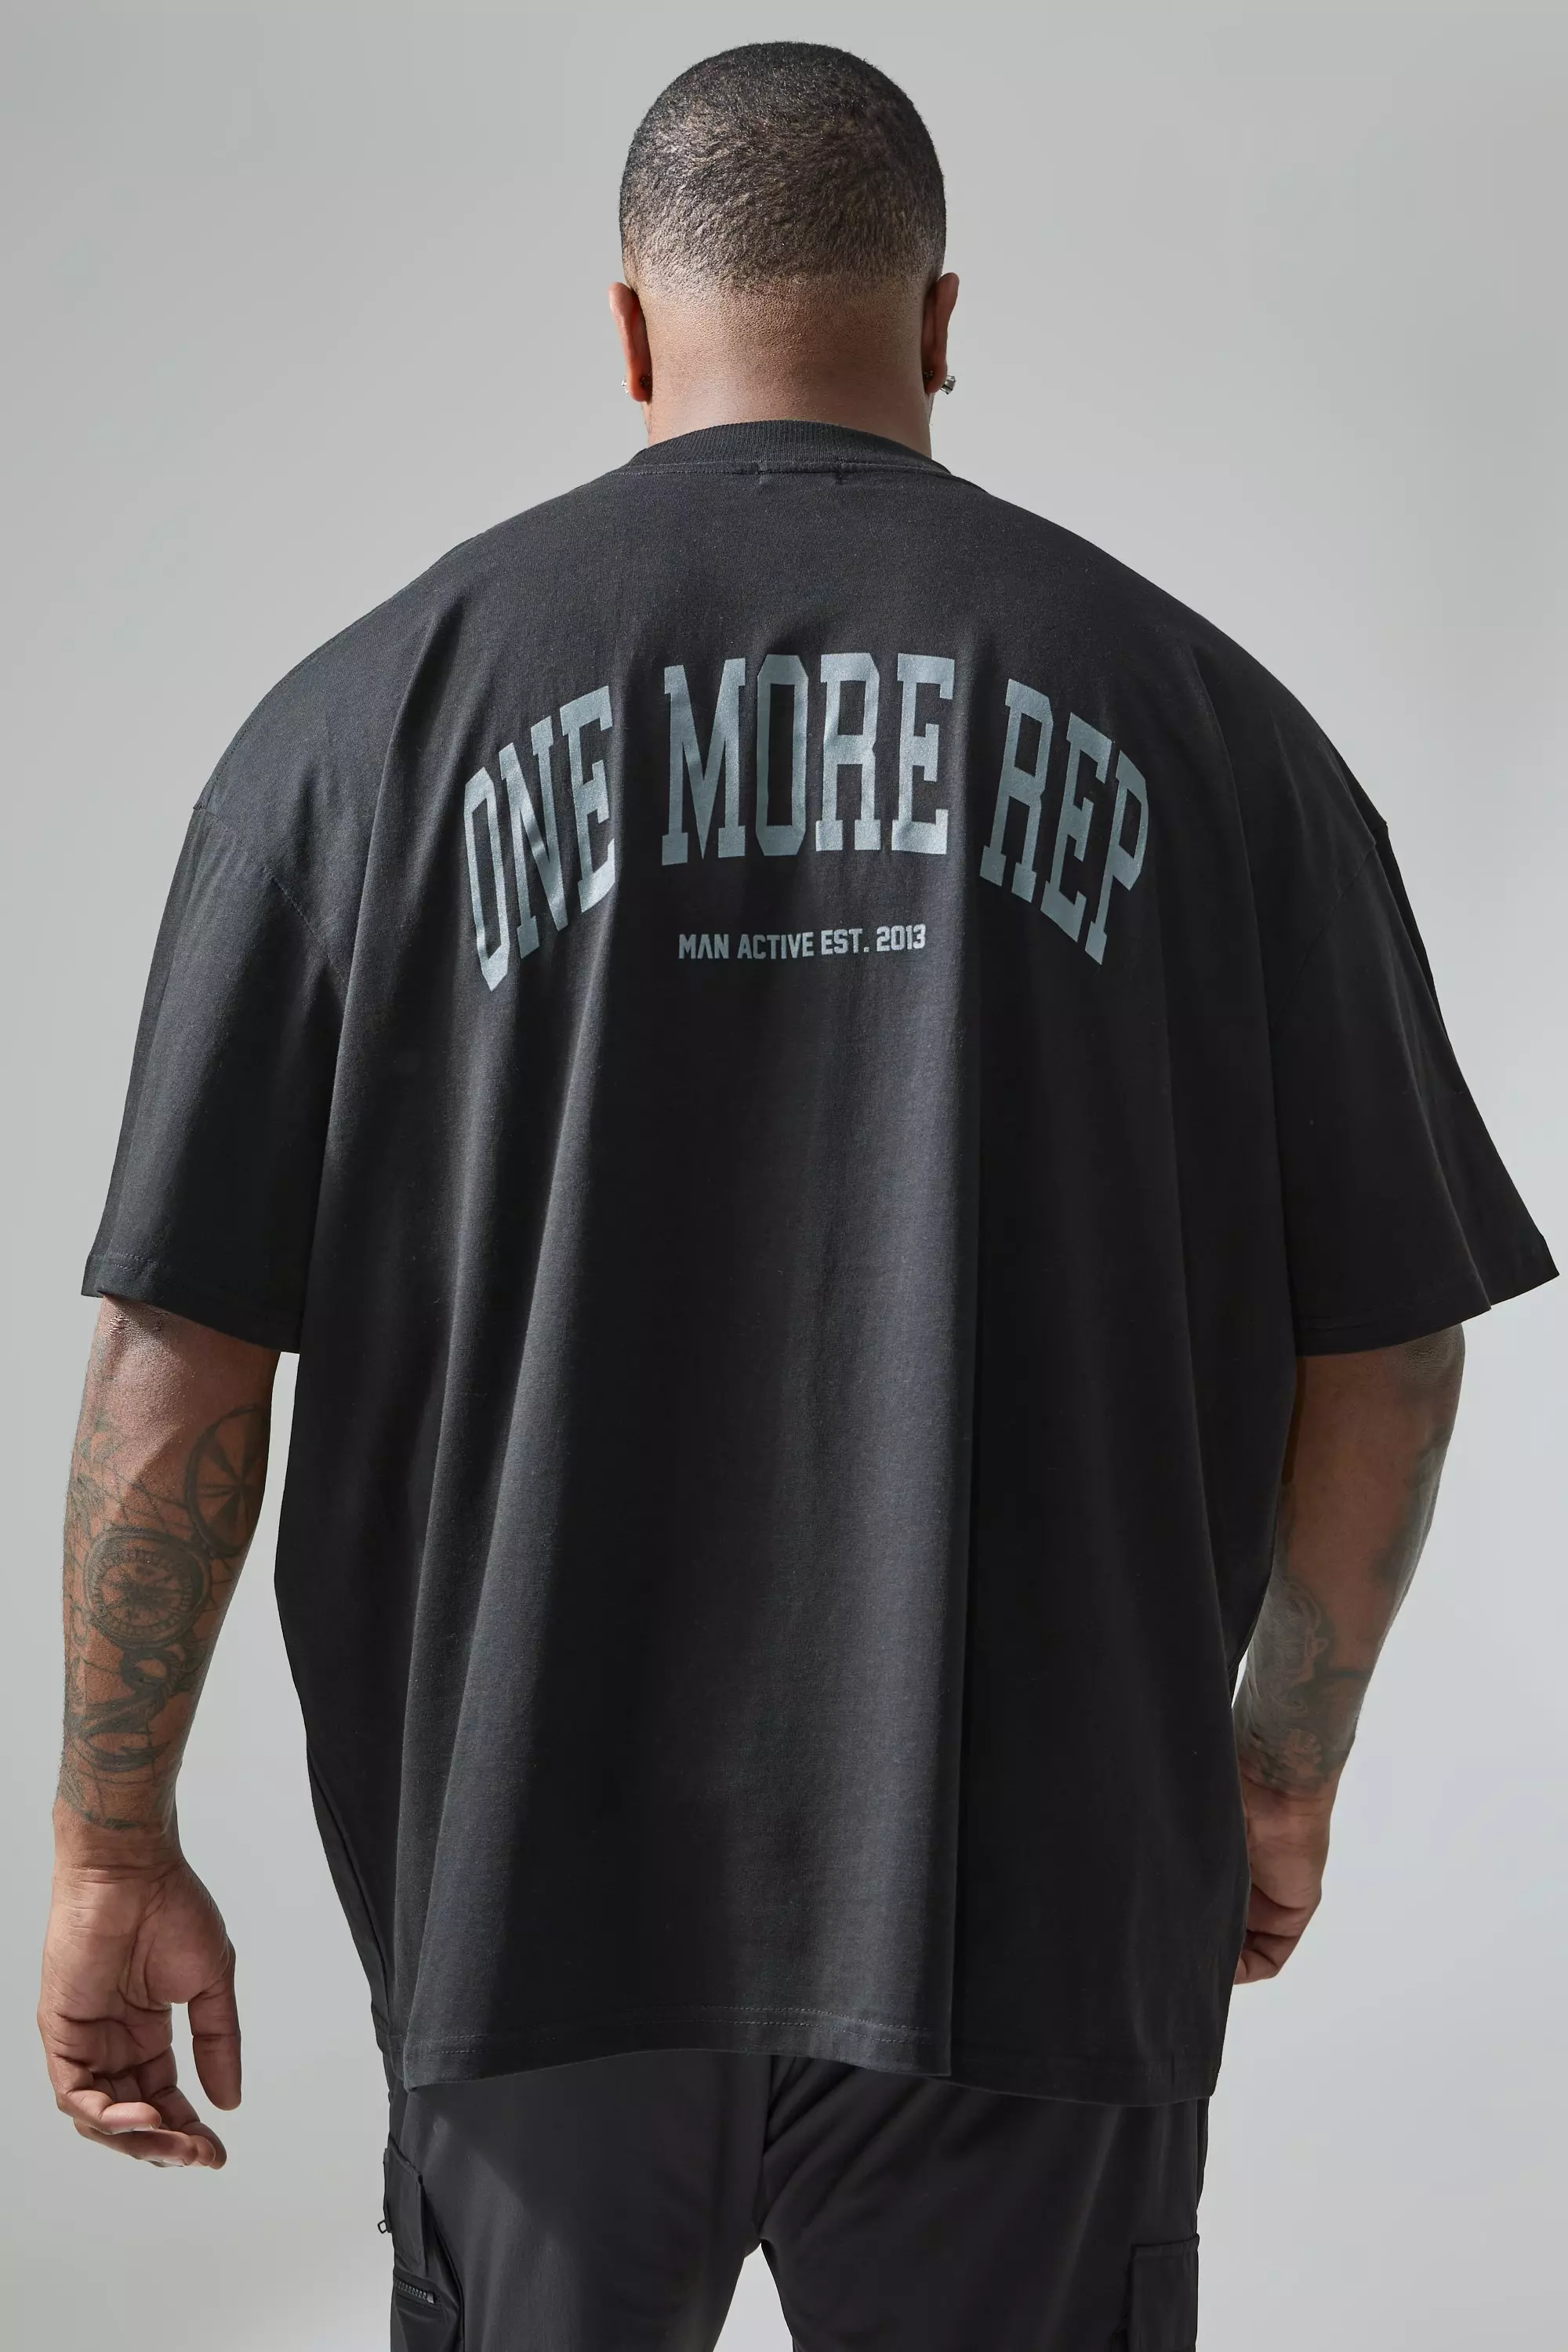 Black Plus Active Extended Neck One More Rep T-shirt